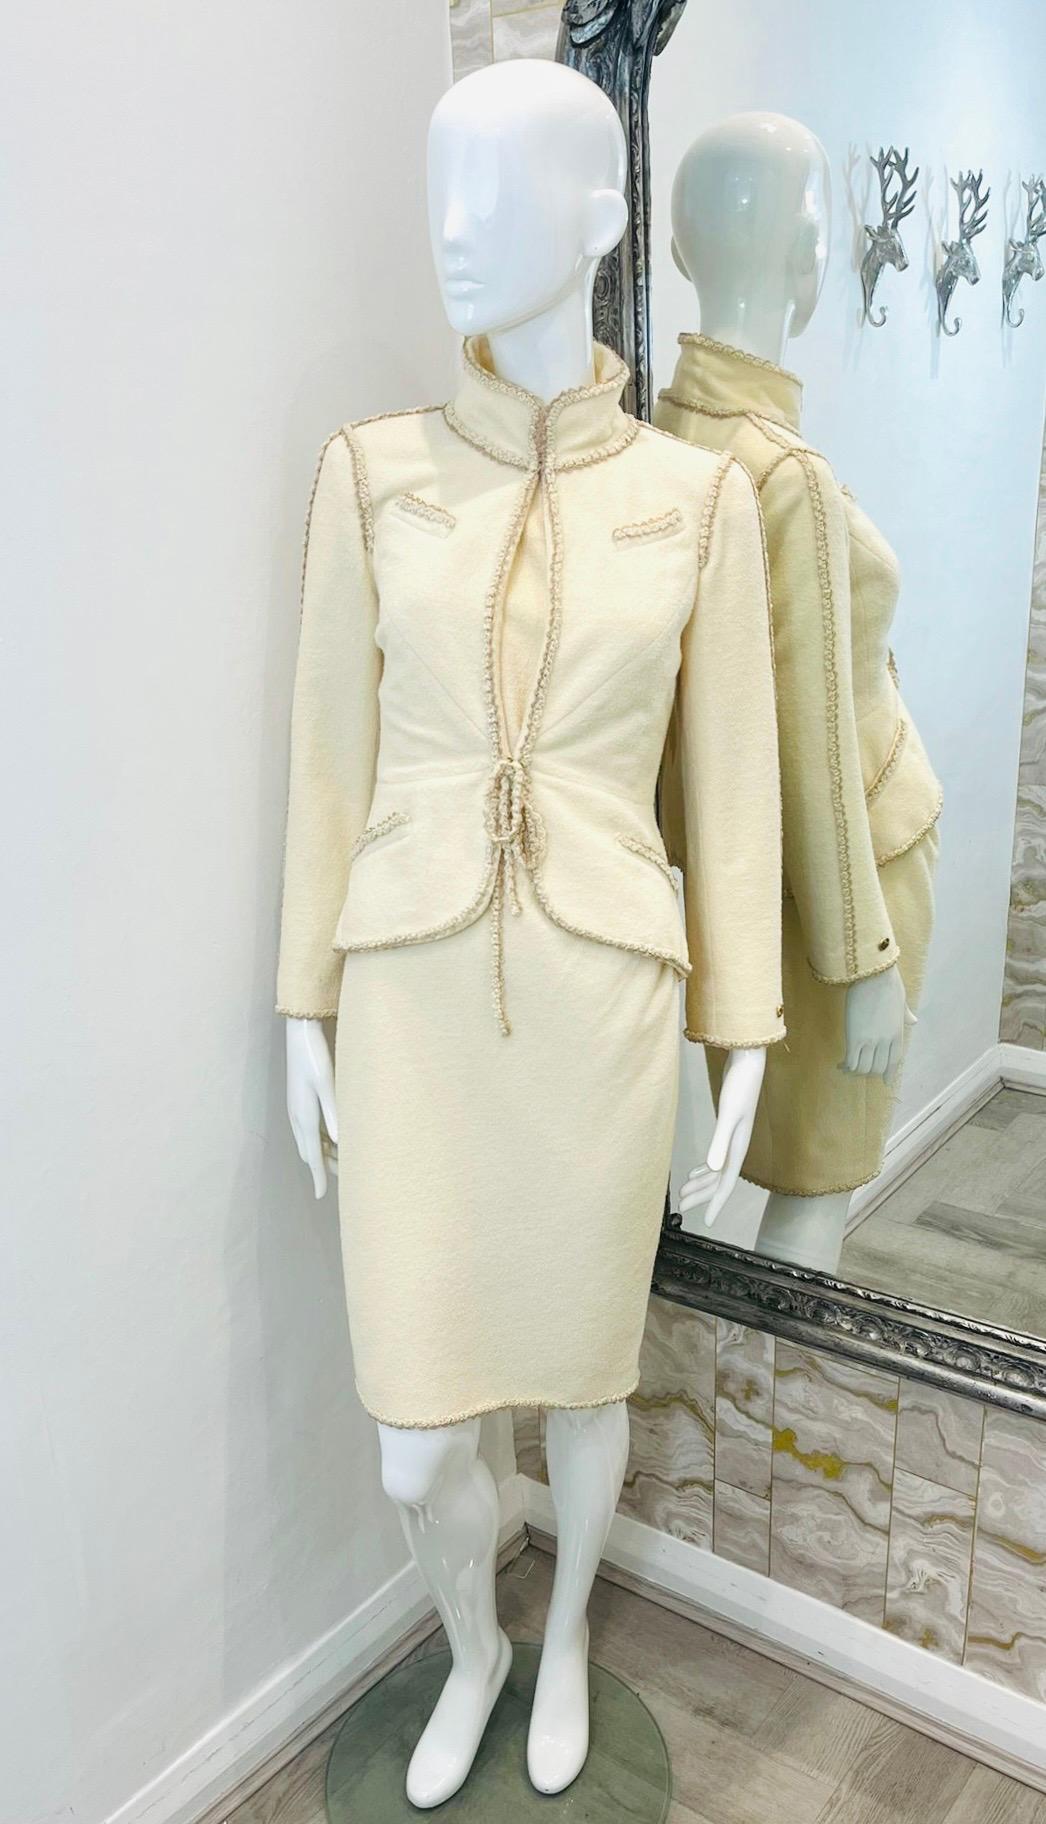 Chanel Wool & Silk Blend Tweed Dress & Jacket Set

Ivory set consisting of a sheath dress and fitted jacket.

Sleeveless, above-the-knee dress designed with round neckline and zip fastening to rear detailed with gold 'CC' logo.

Collared jacket